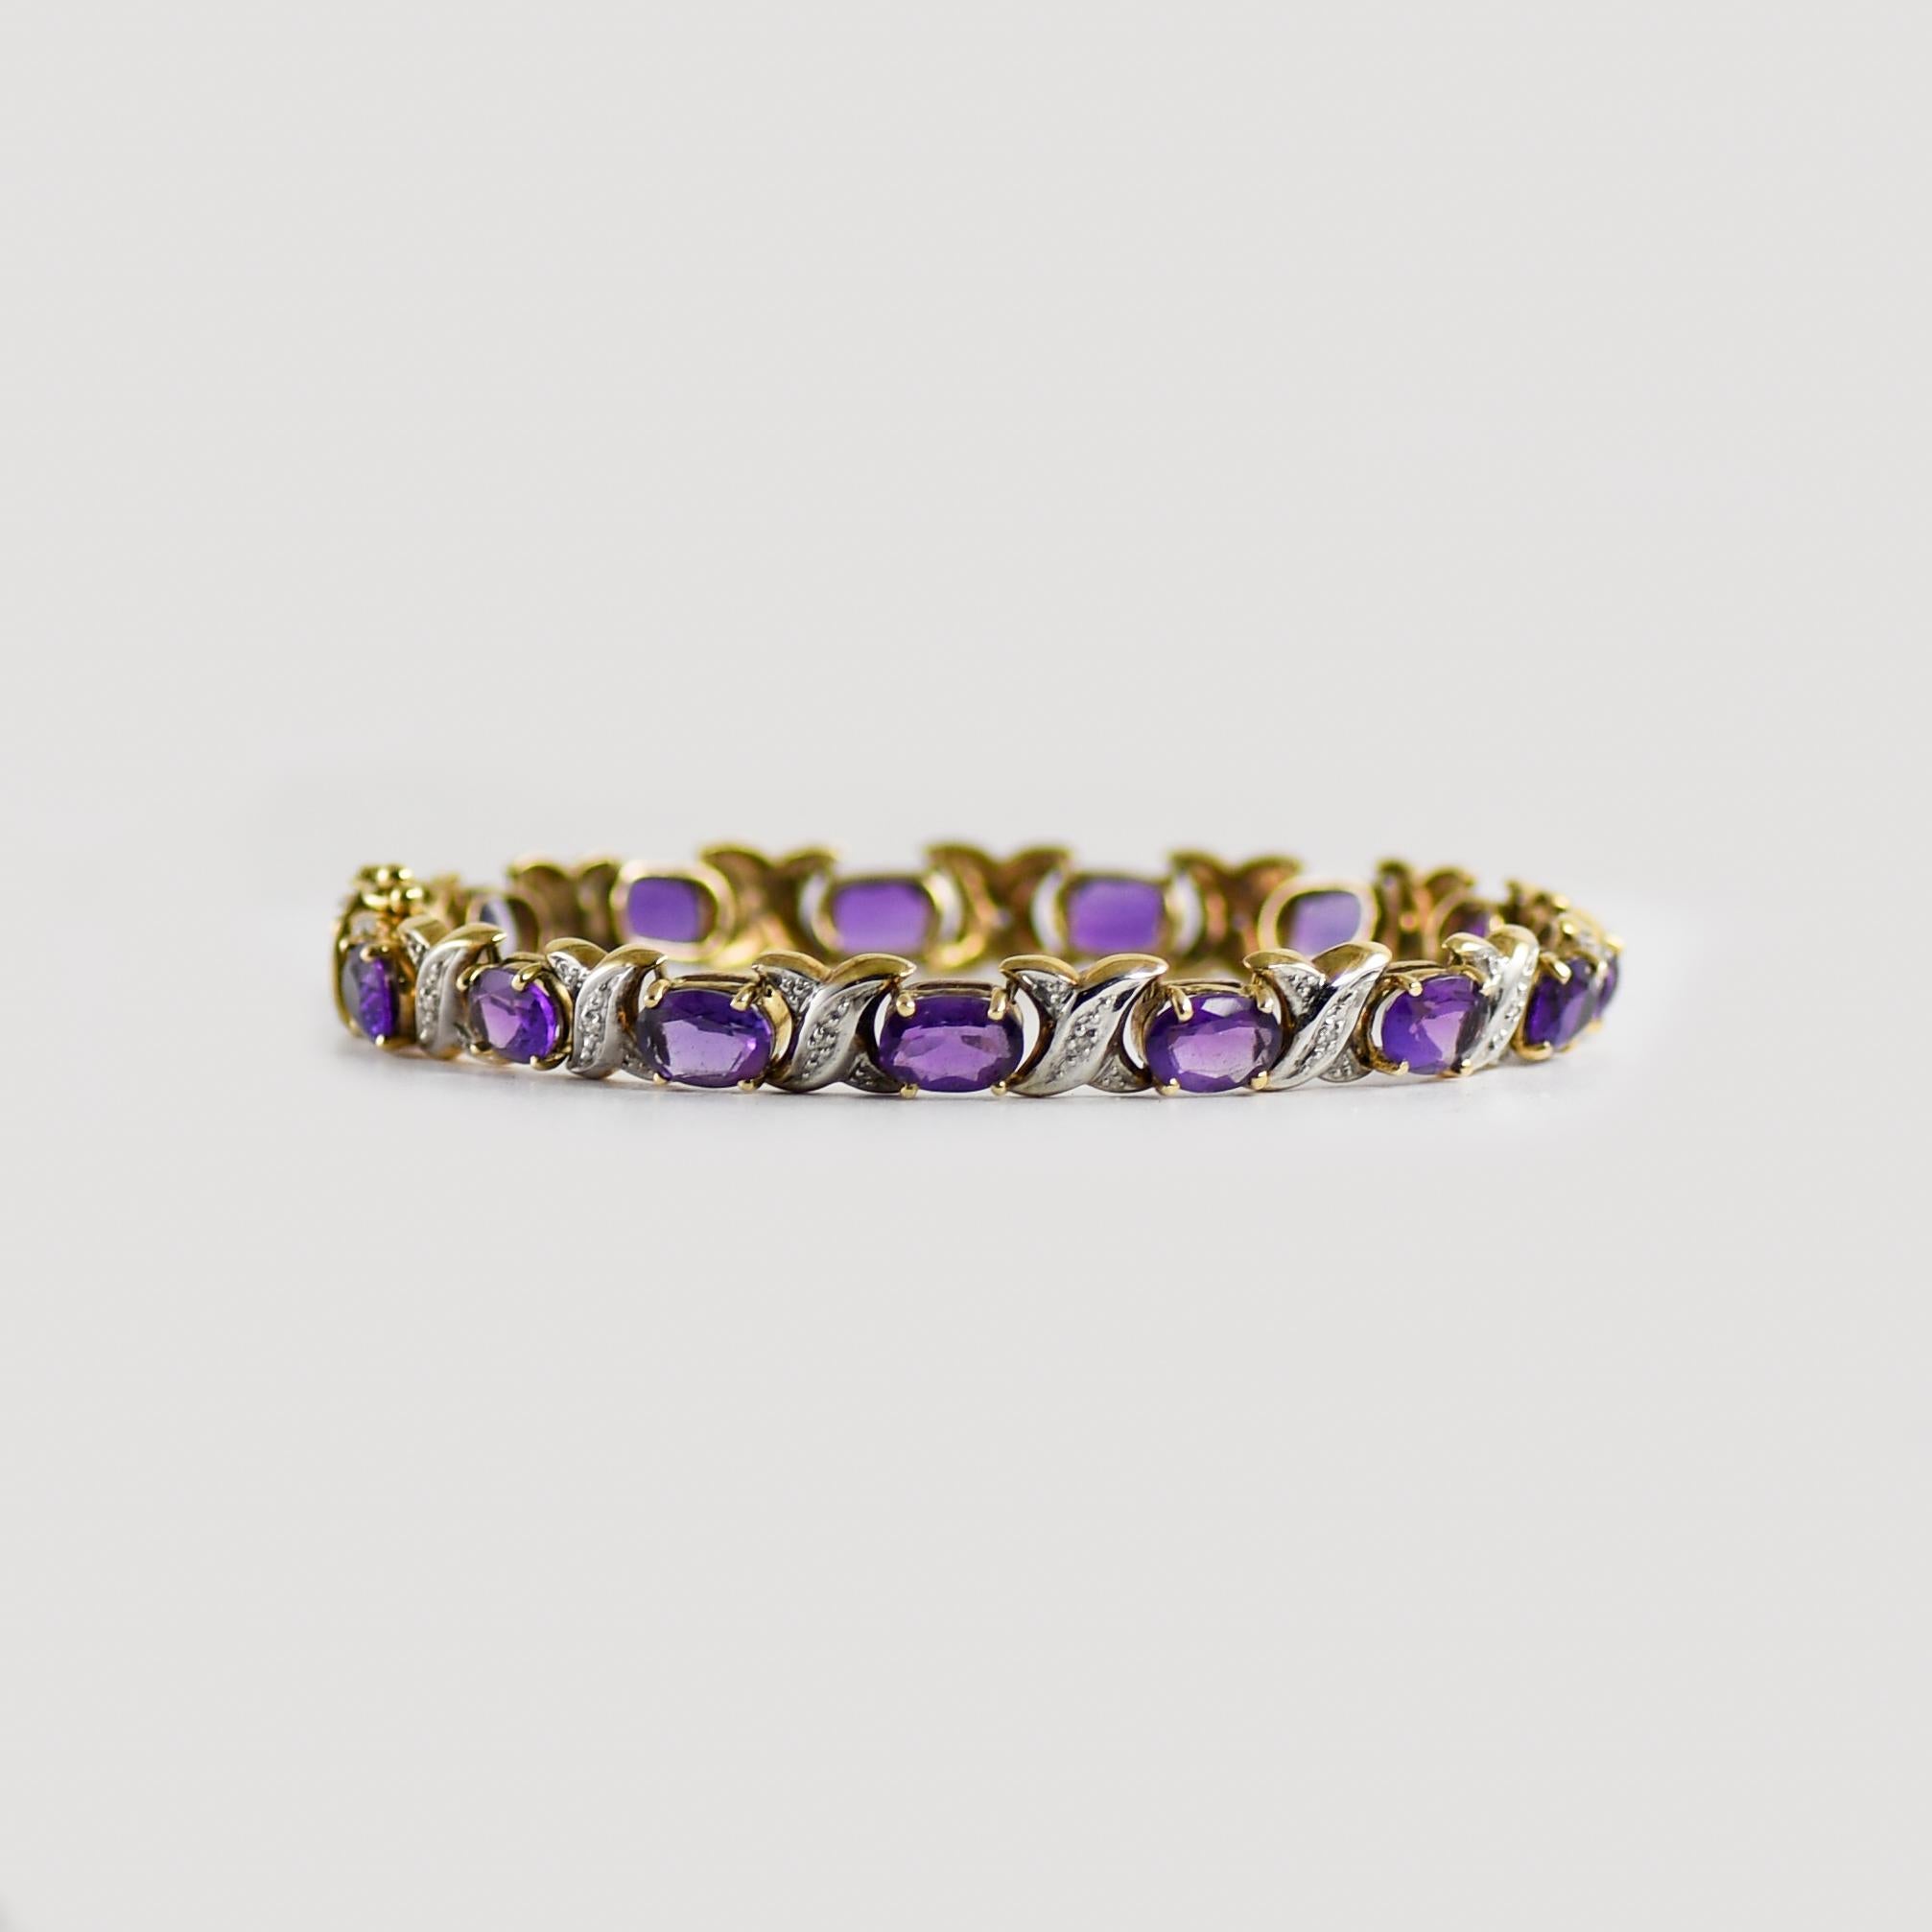 14K White Gold Amethyst & Diamond Bracelet.
Stamped 14k and weighs 13 grams.
The amethyst stones are oval-shaped and are a fine medium purple color.
There are nine small round diamonds in between the amethysts, .09 total carats.
The bracelet